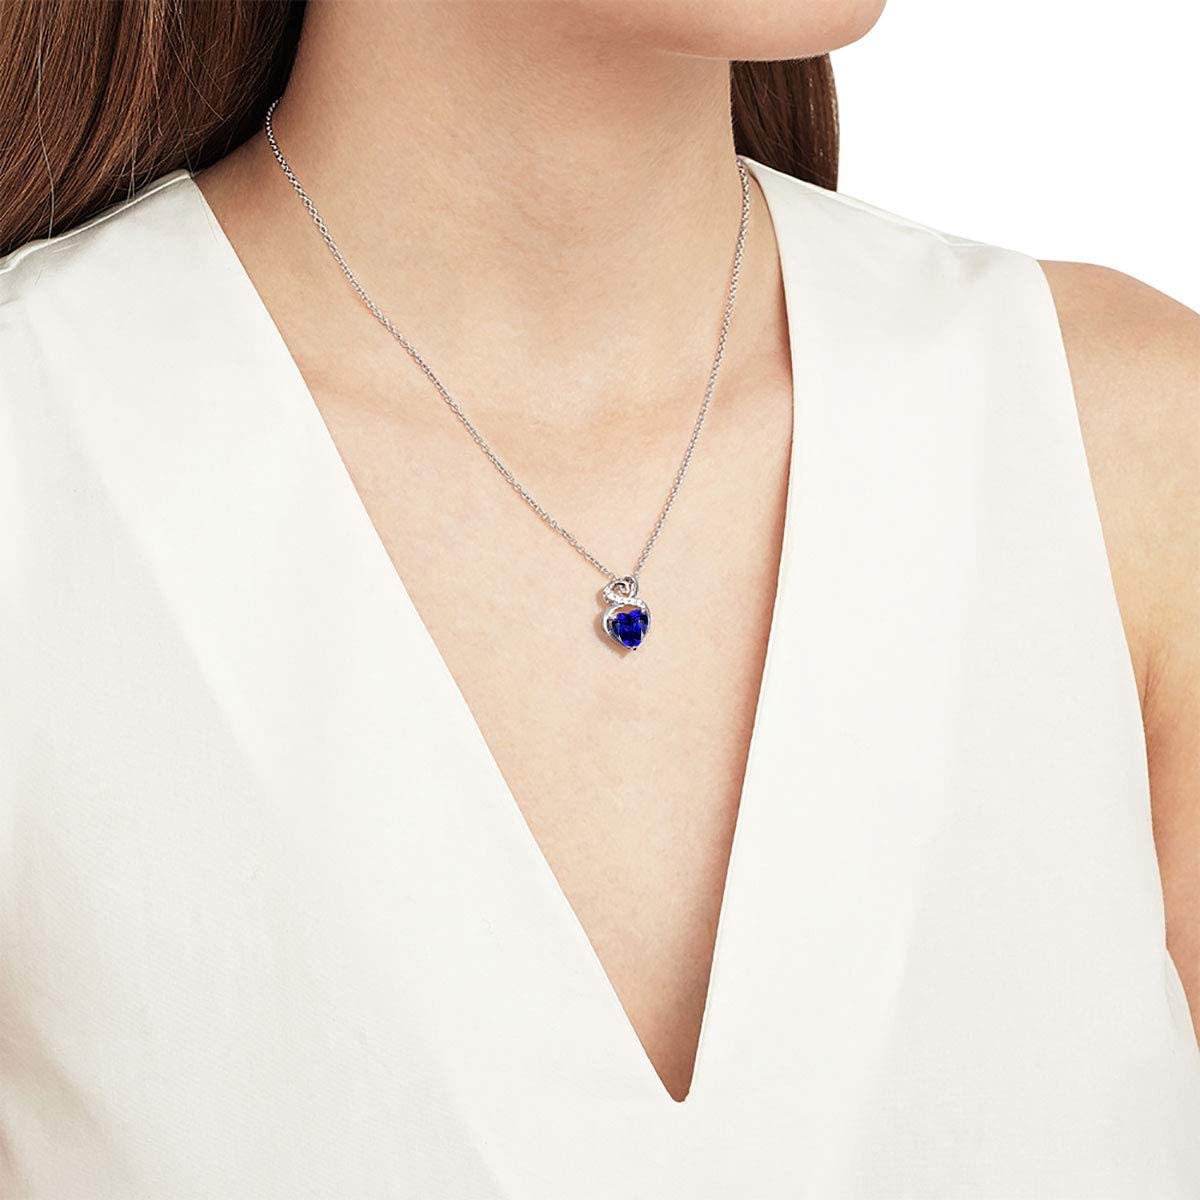 FANCIME "Infinity Heart" Sapphire September Gemstone Sterling Silver Necklace Show